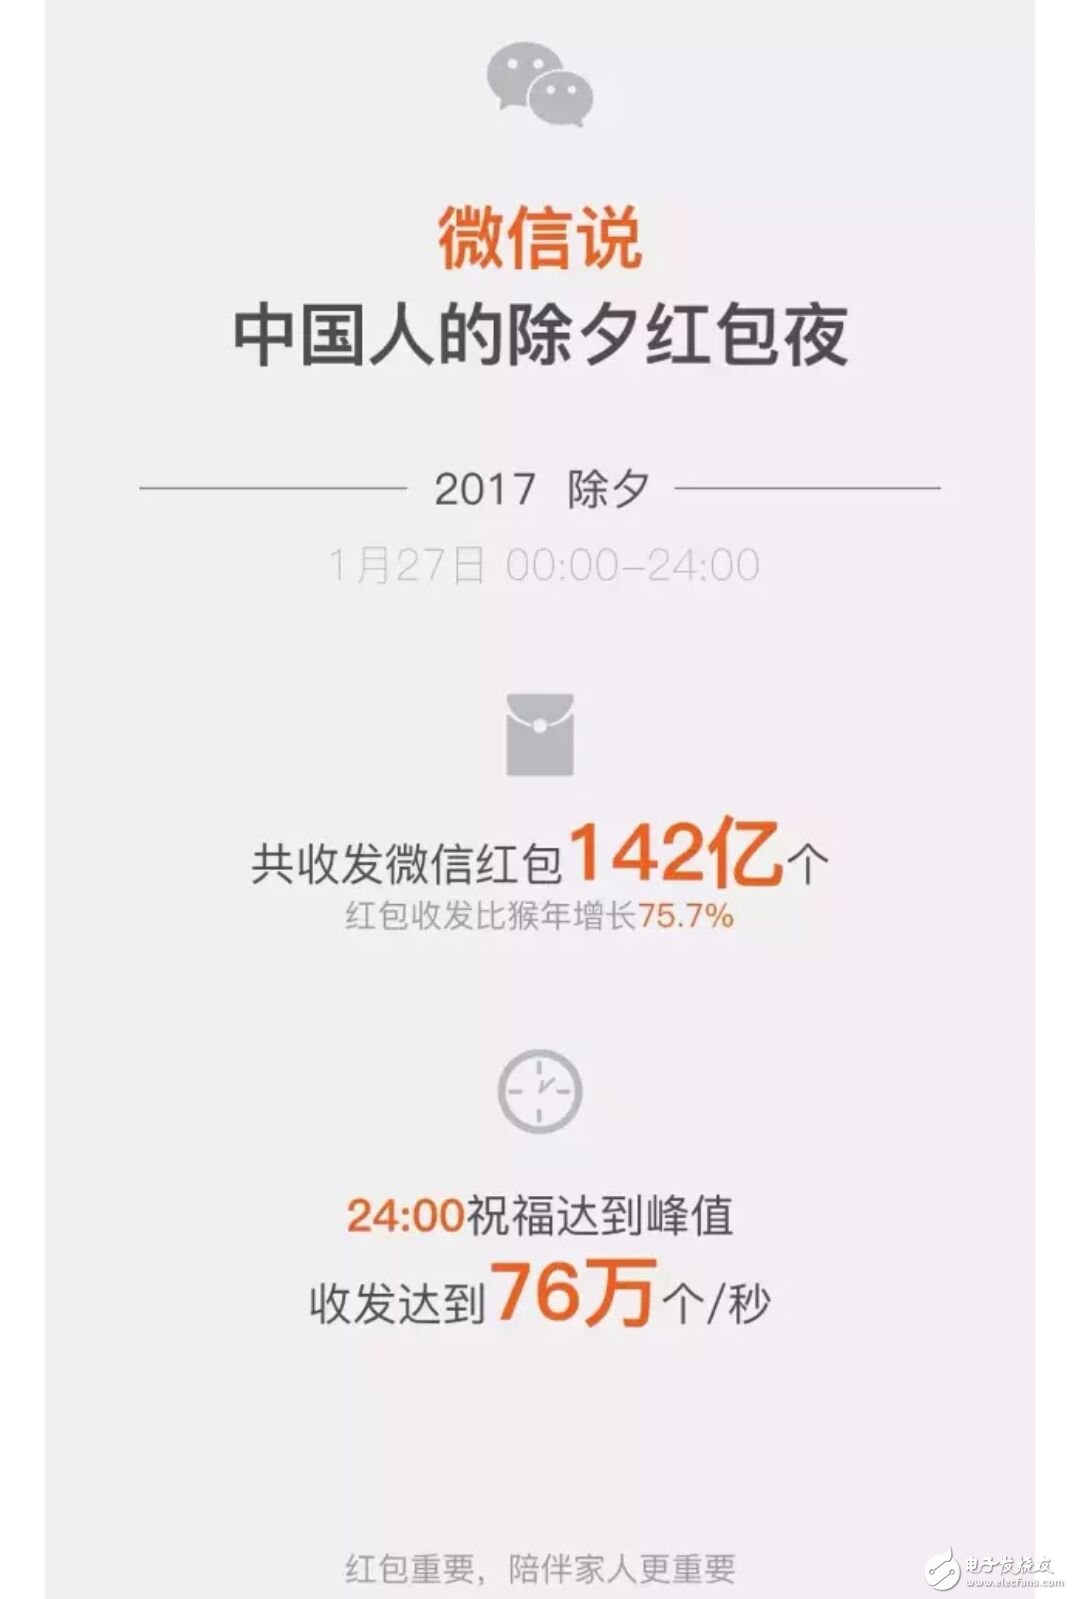 I feel that I played fake WeChat New Year's Eve WeChat red envelope big data: A guy received 10069 red envelopes